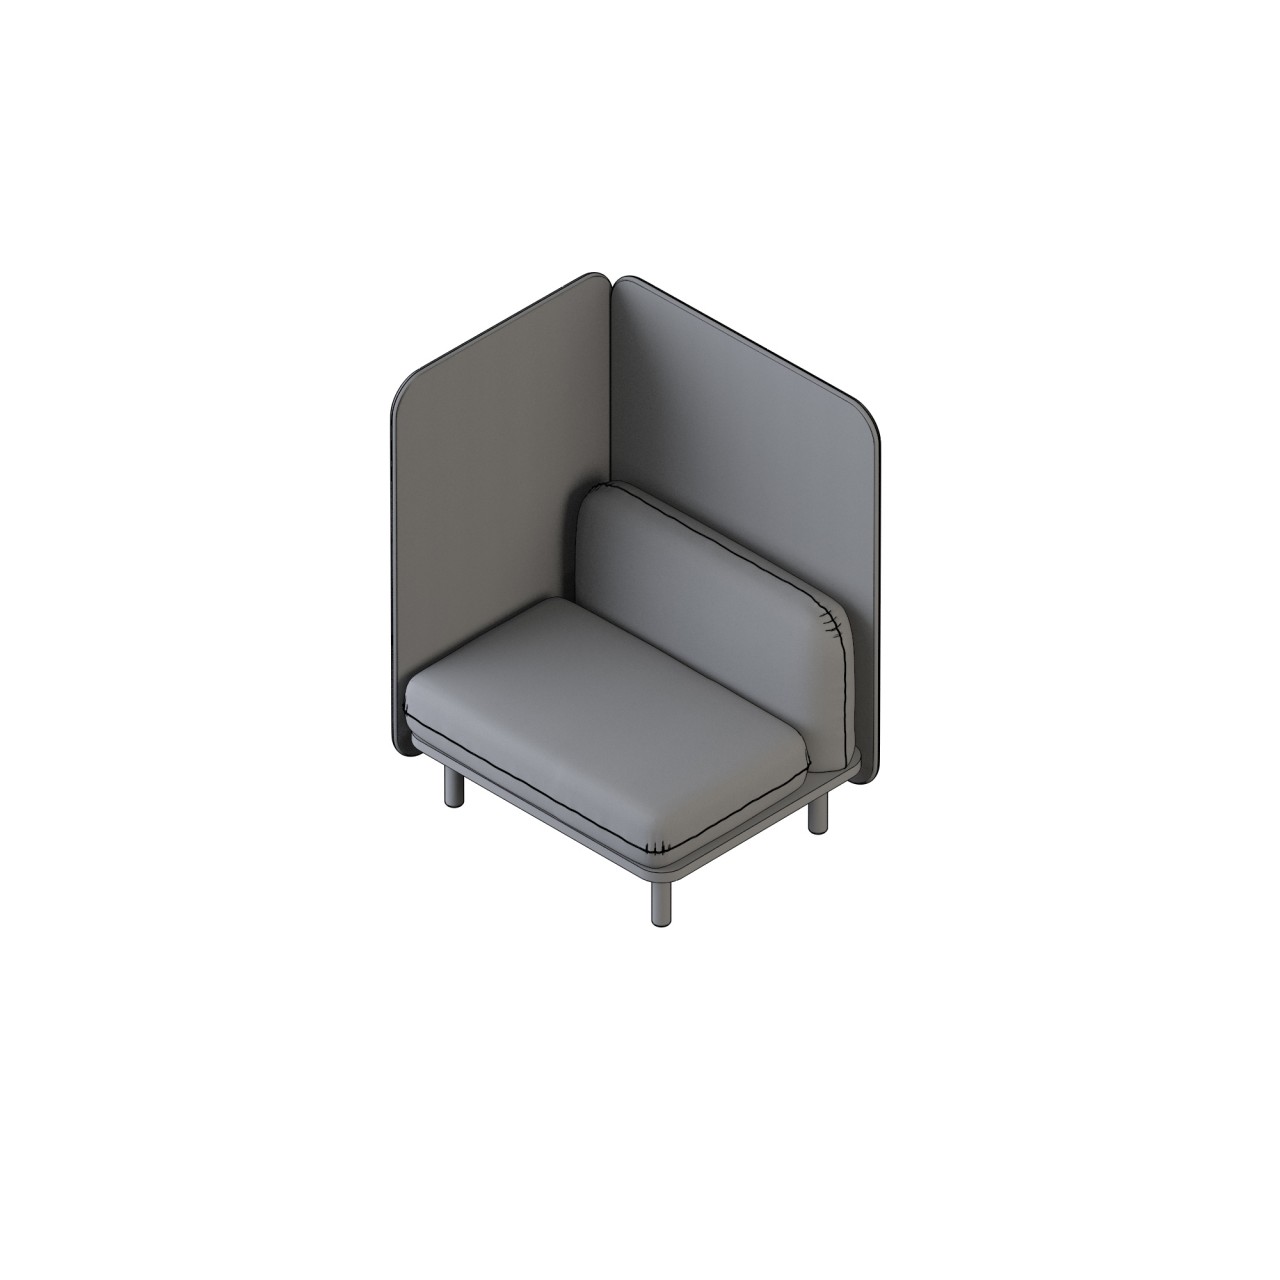 Soft - 24003-BR
one seat privacy
back and right
COM 9.75
back 1.75,
base 1, seat 2.75,
panels 4.75